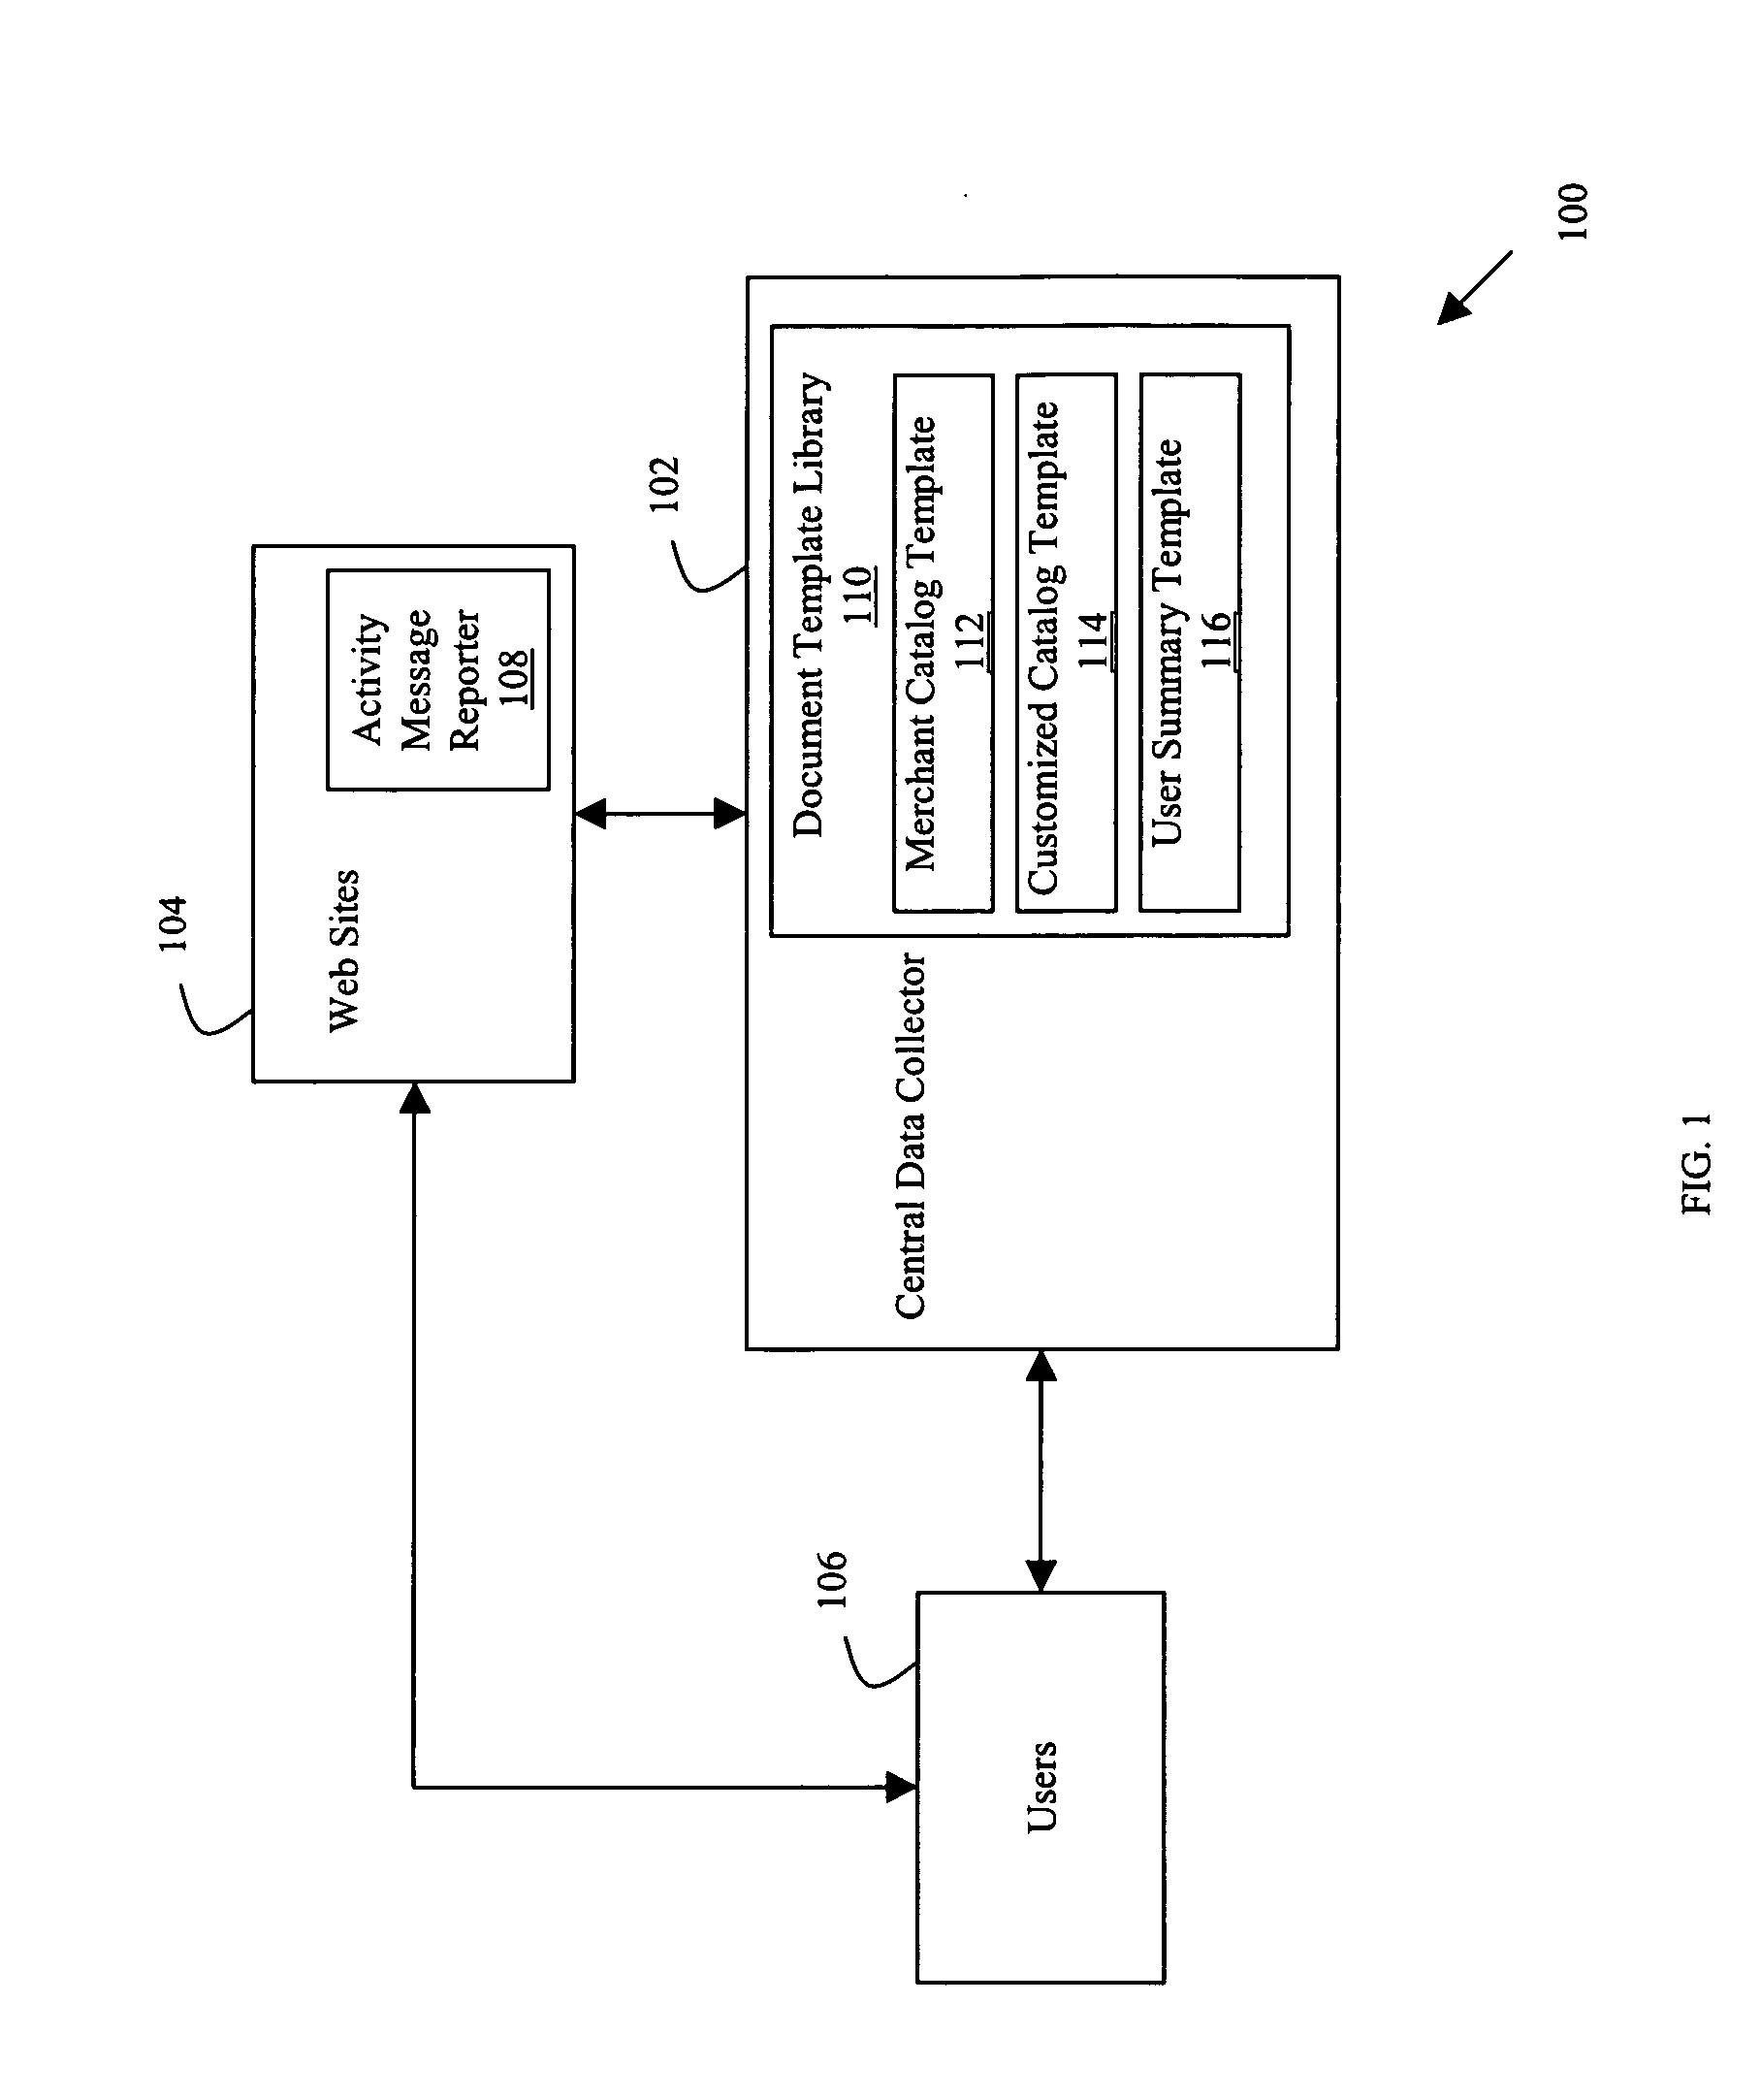 Method for dynamically building documents based on observed internet activity